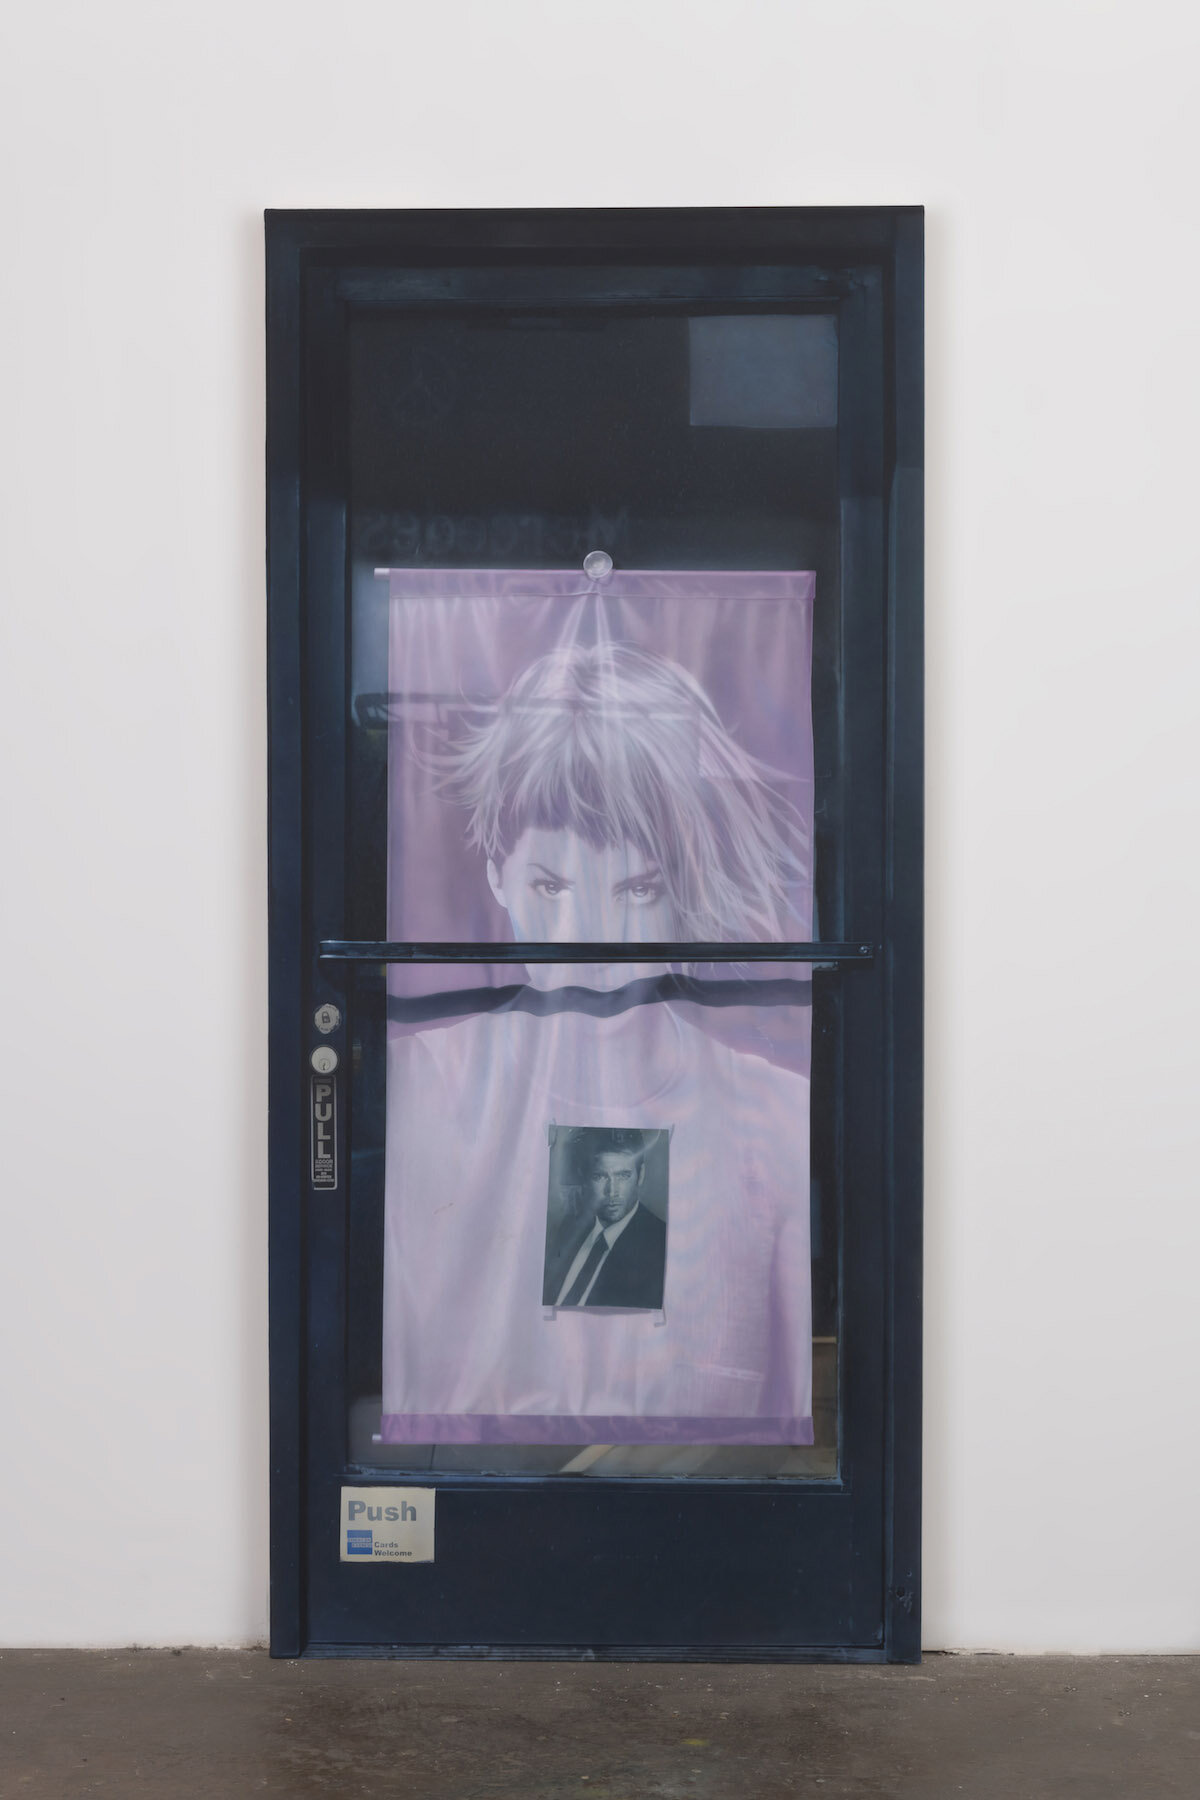   Glendale Door,  2019. Acrylic on canvas. 80 x 30 inches 